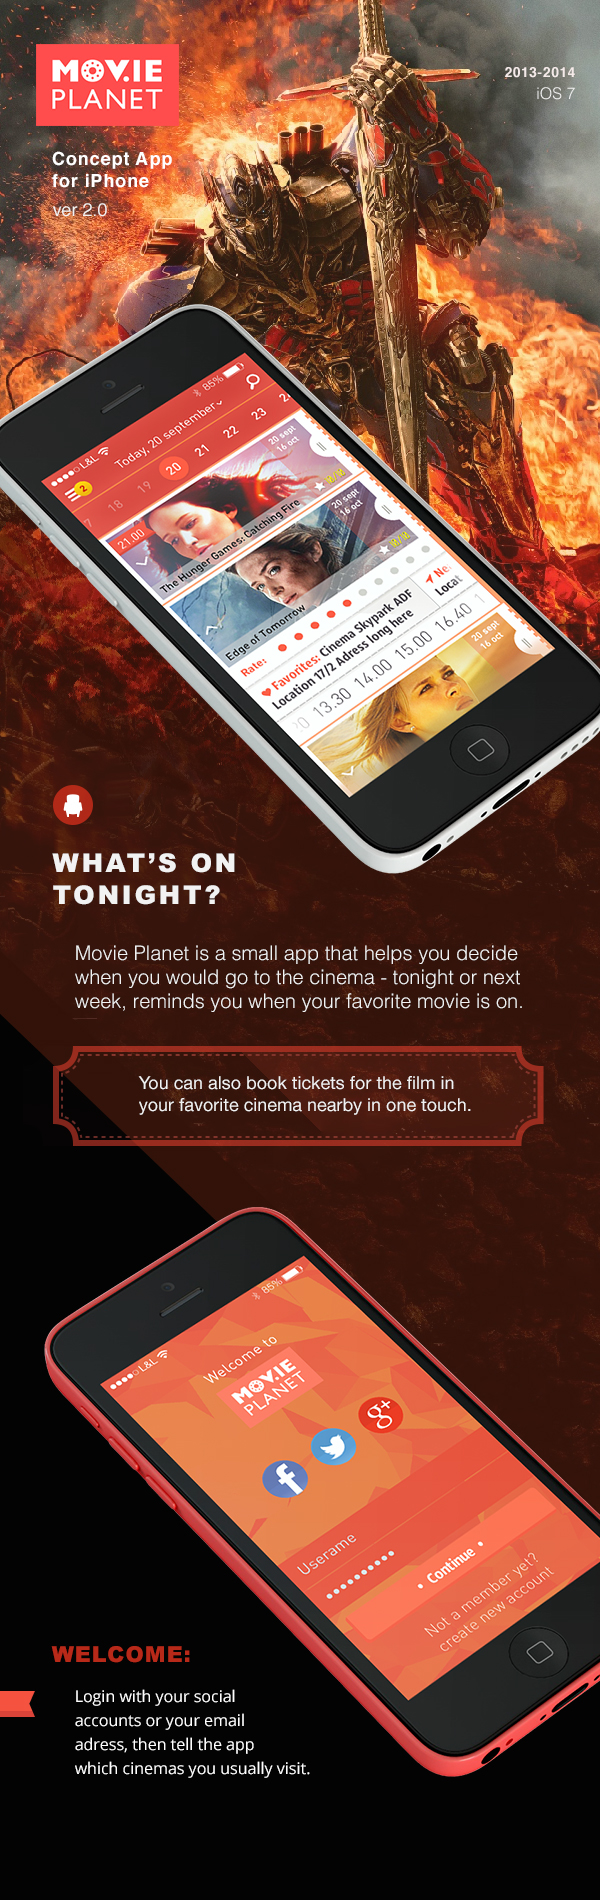 movie ticket book Cinema app ios iphone flat trailer review schedule rate watch theater  Show